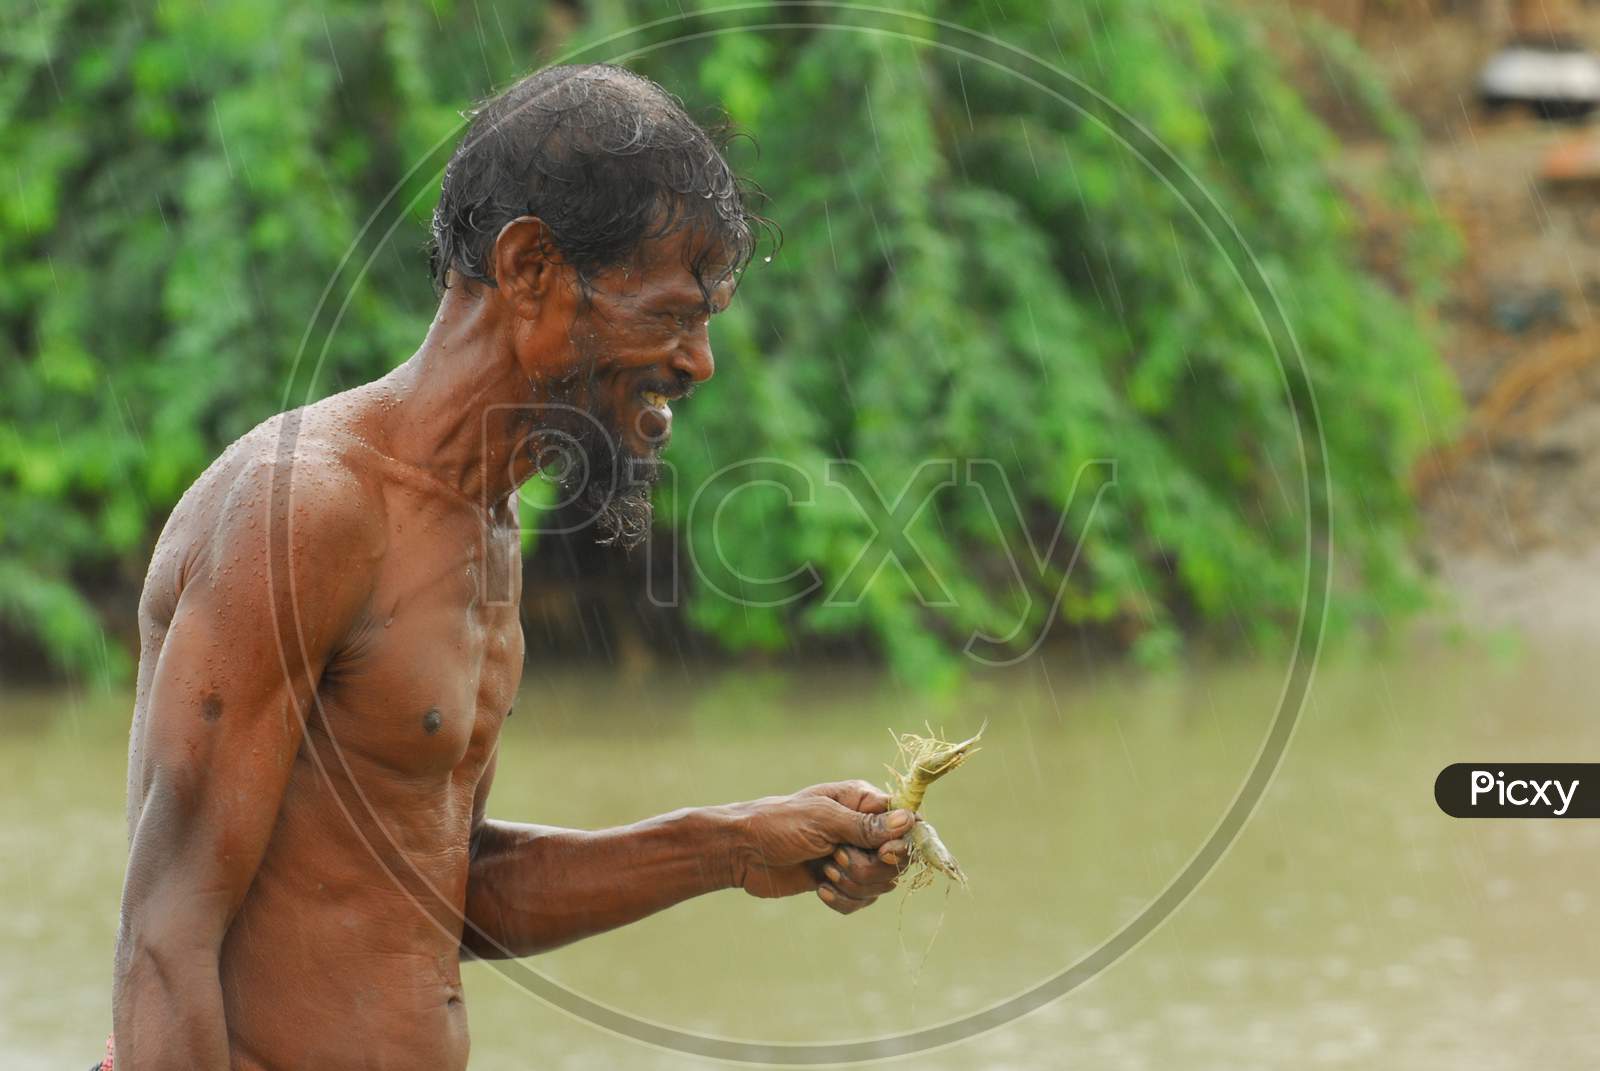 Indian bare chested man holding a shrimp